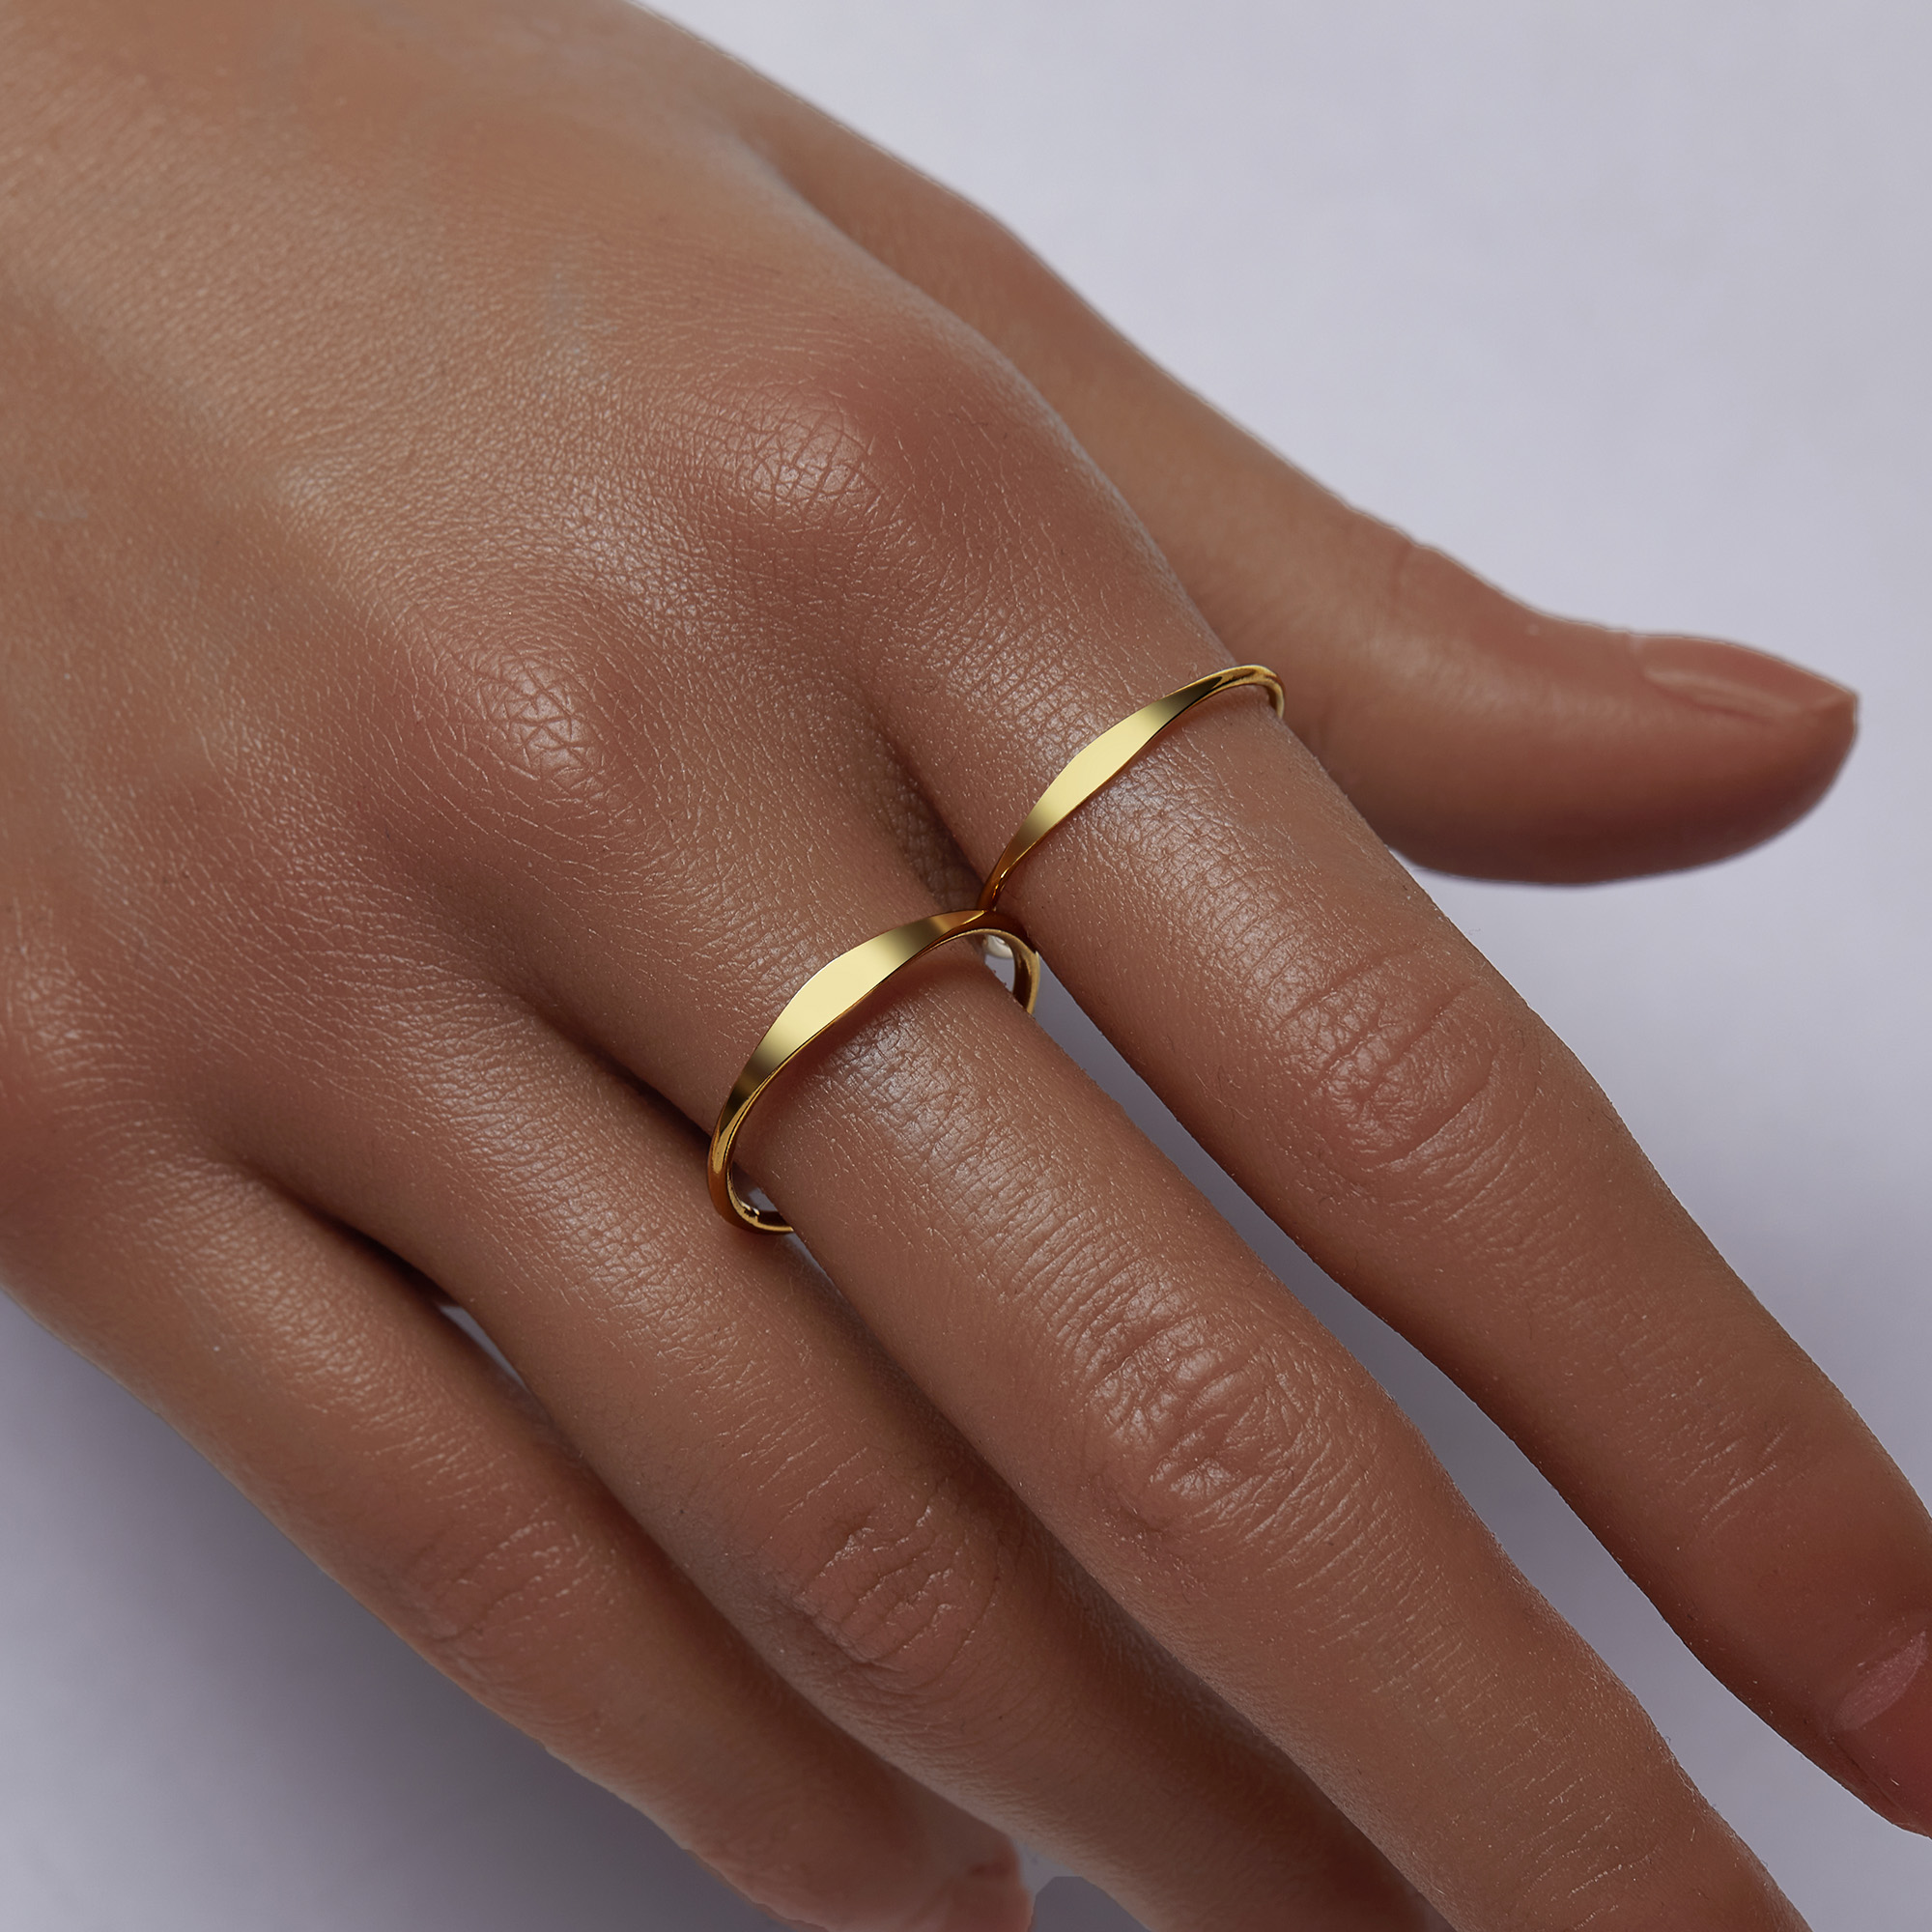 1PCS 14K Gold Filled Slim Band Ring,Initial Stamping Ring,Tiny Minimalist Ring,Stackable Ring,DIY Ring Supplies 1294731 - Click Image to Close